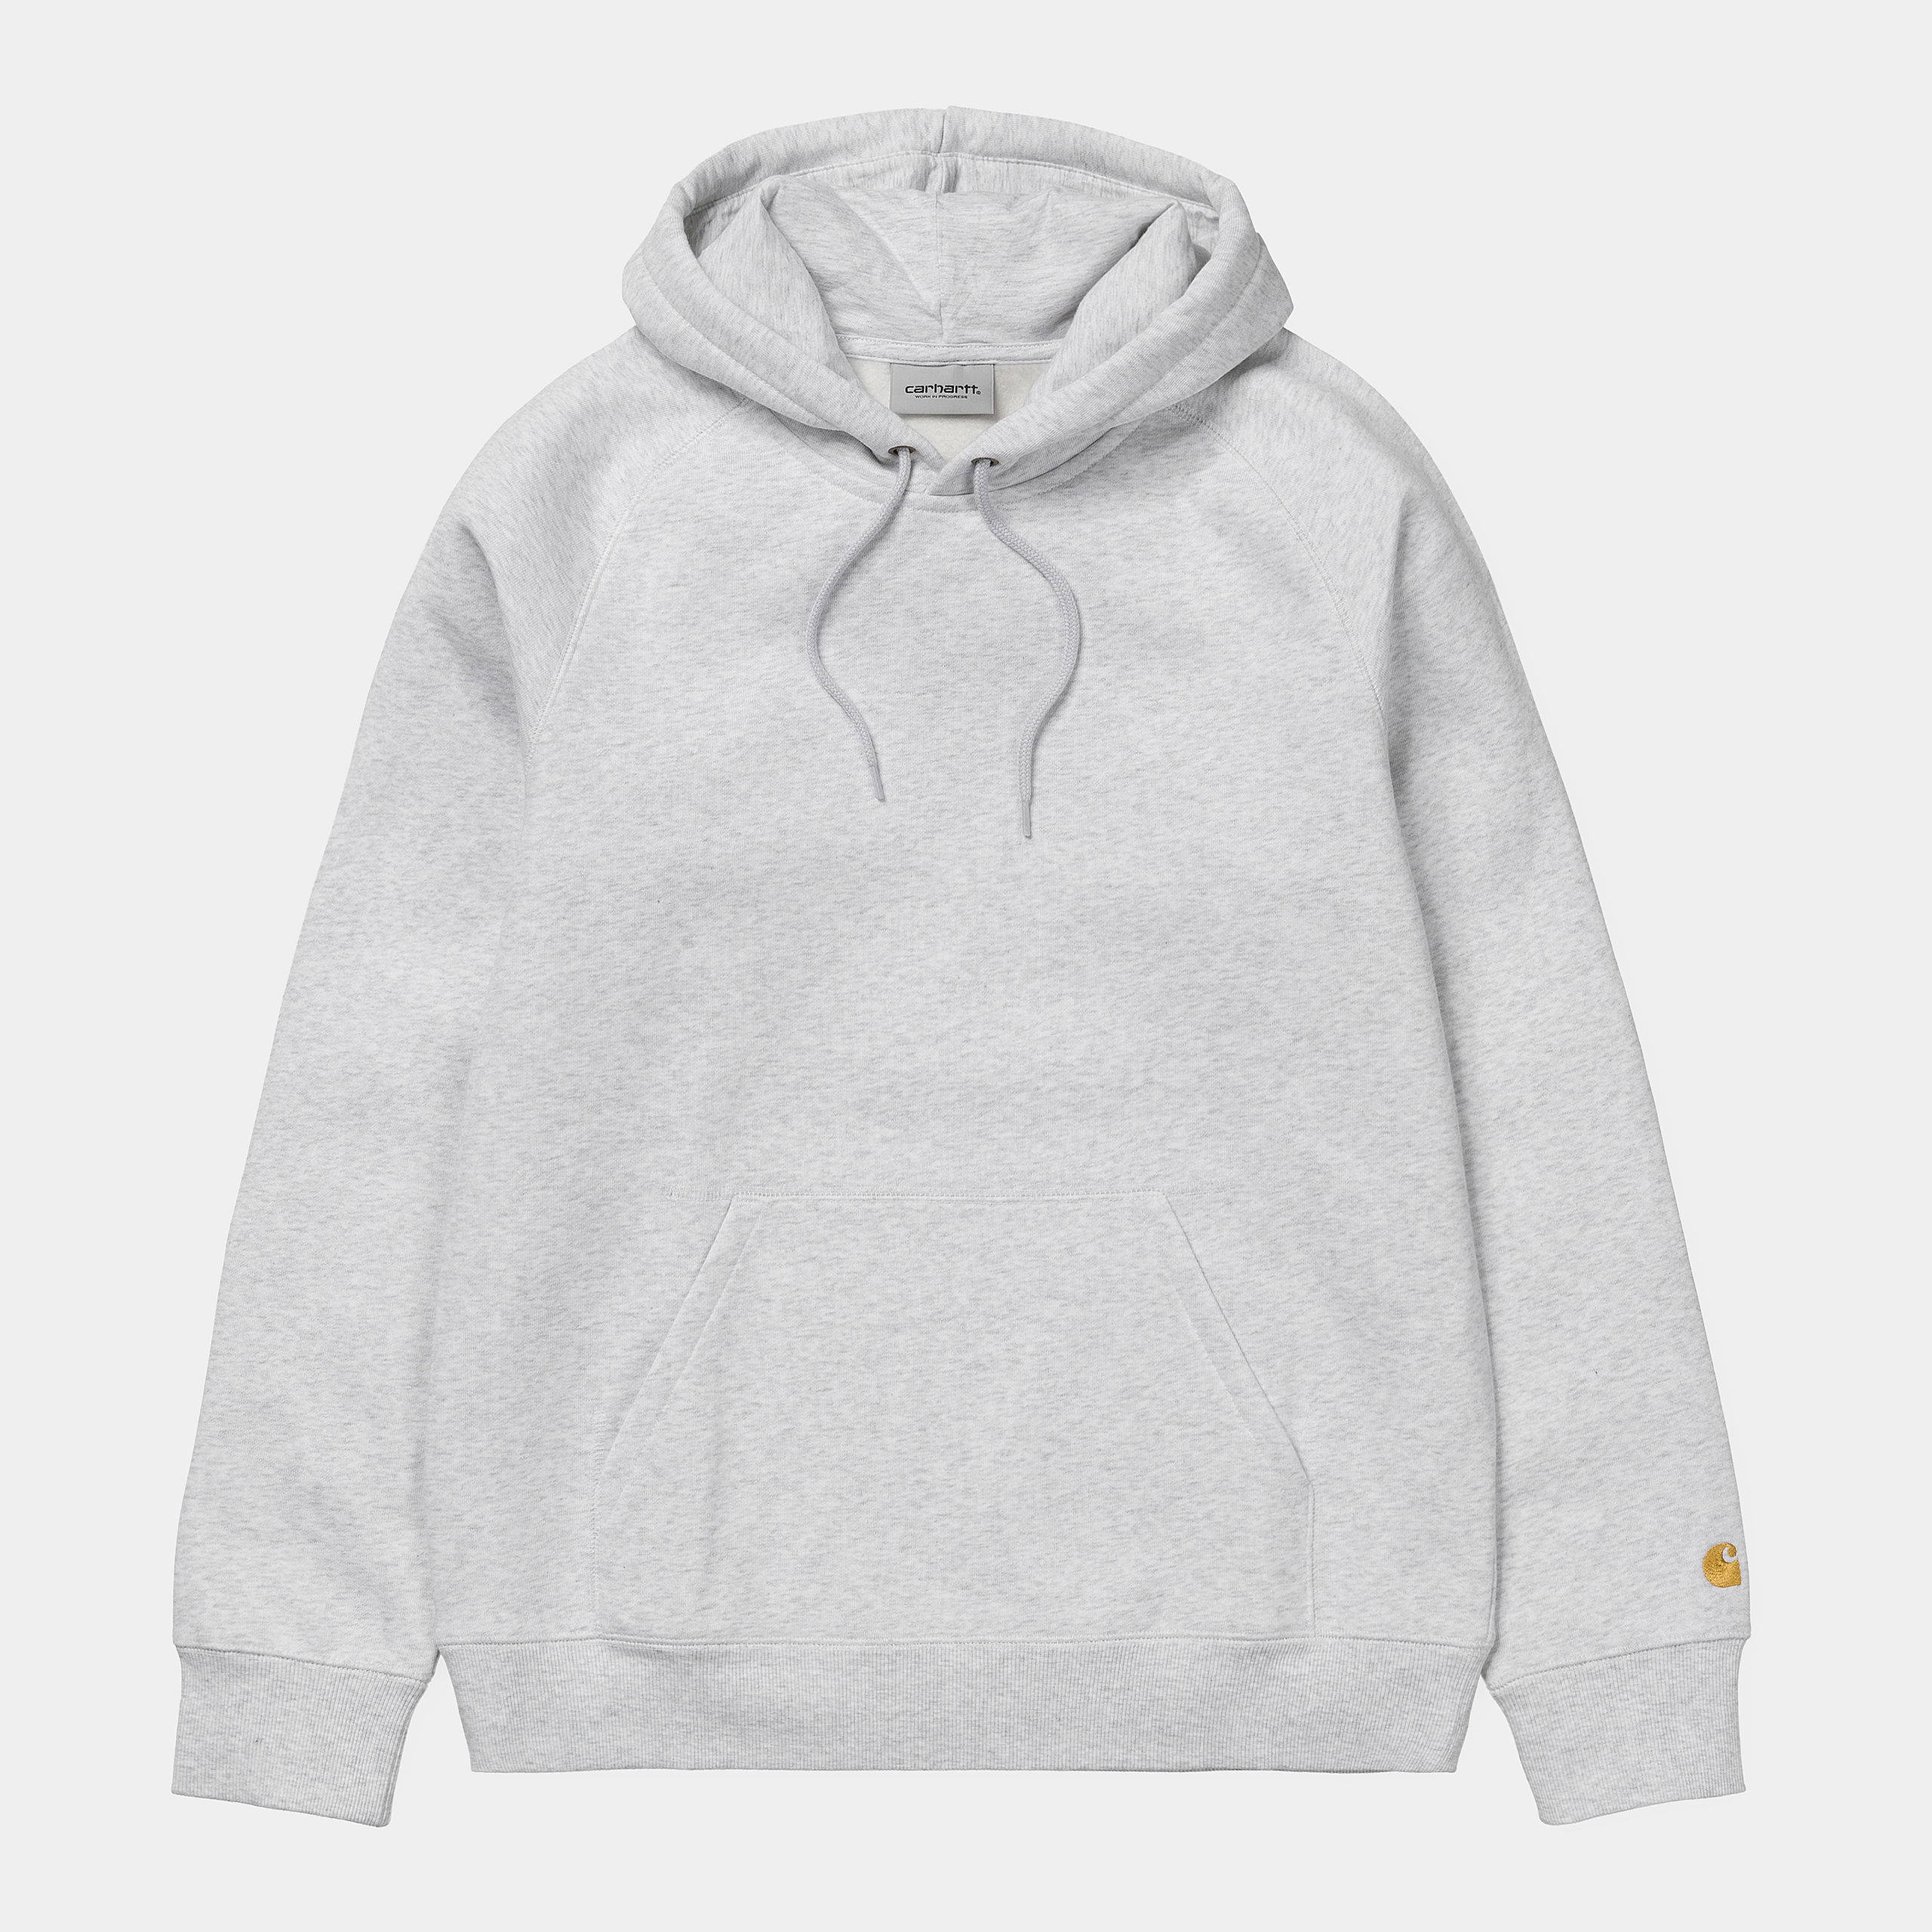 Carhartt Hooded Chase Sweat - Ash Heather 